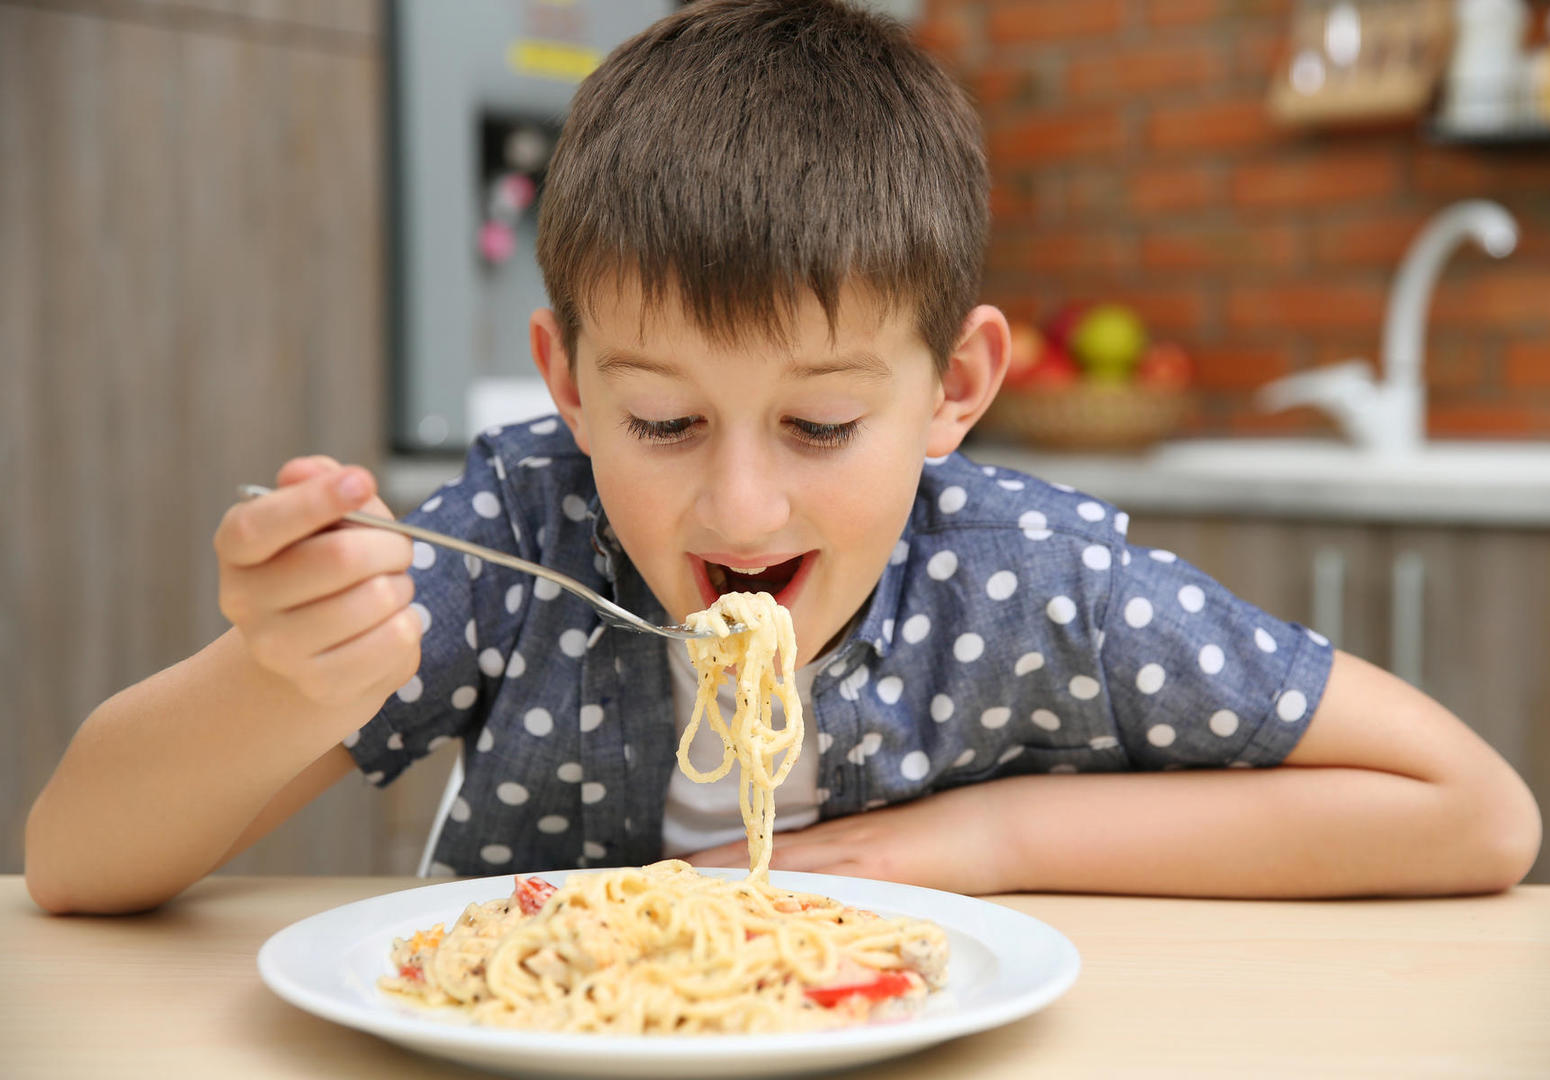 90% Of People Will Fail This Tricky General Knowledge Test. Will You? kid eating pasta